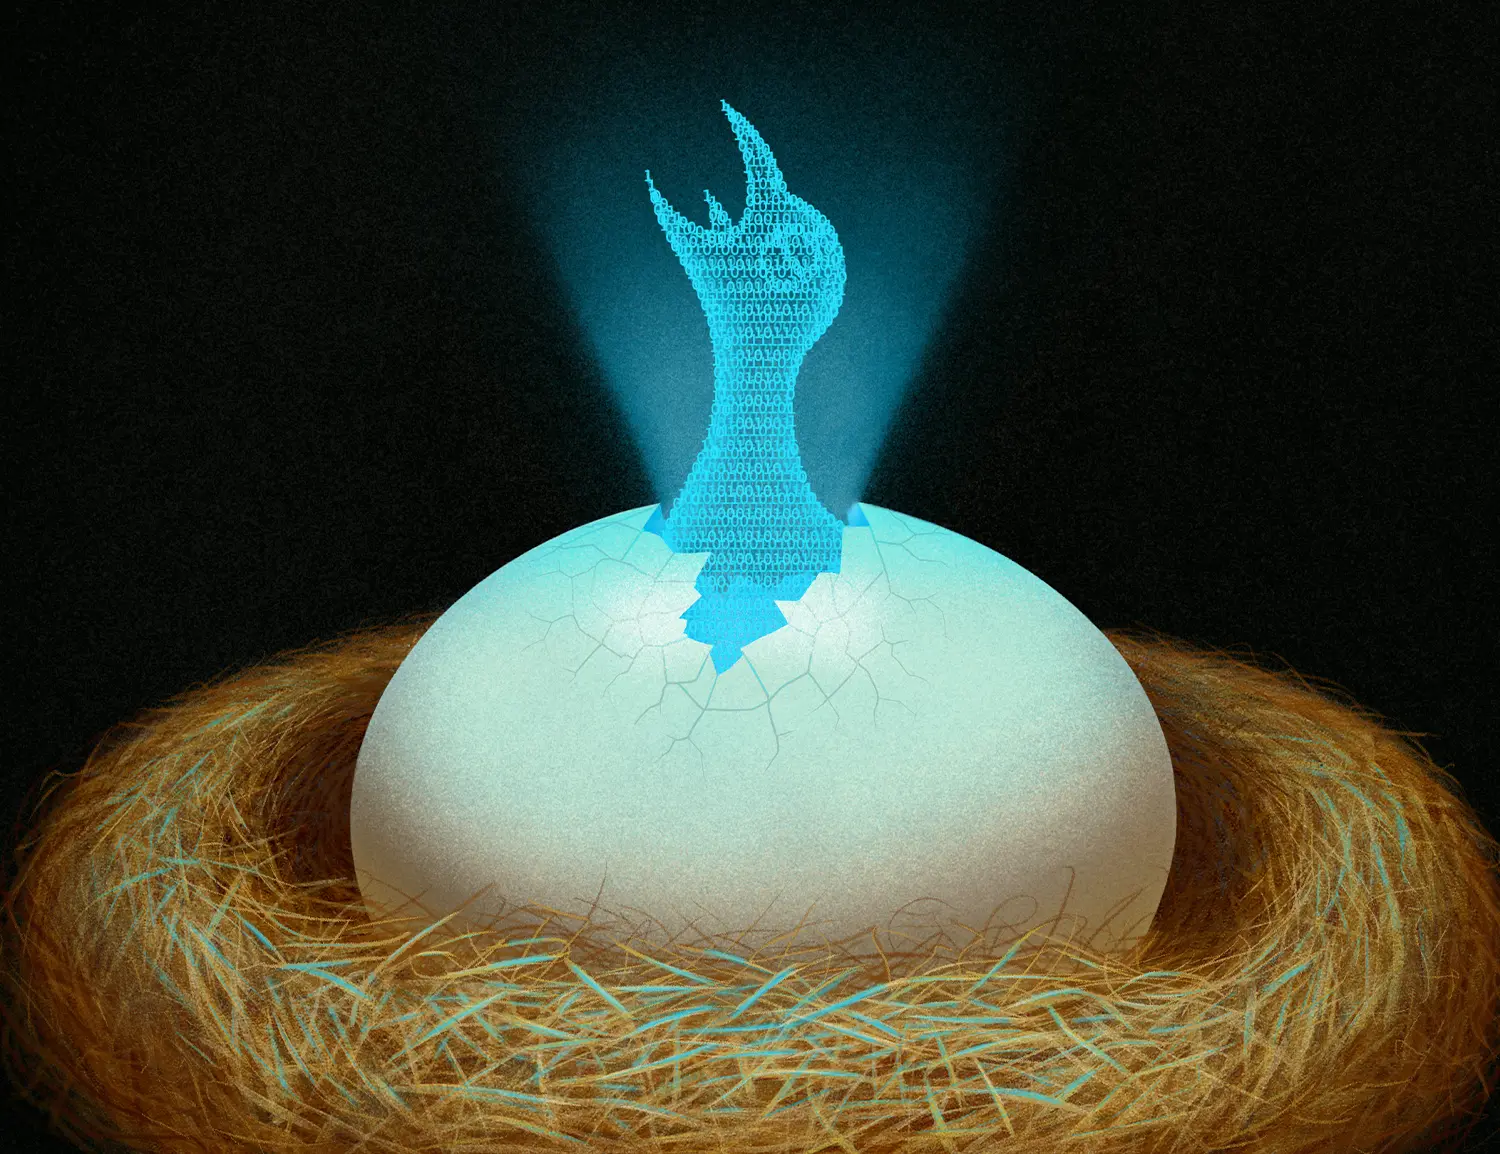 illustration of a cracked egg in a nest releasing a crowing chick made of glowing, blue binary numbers